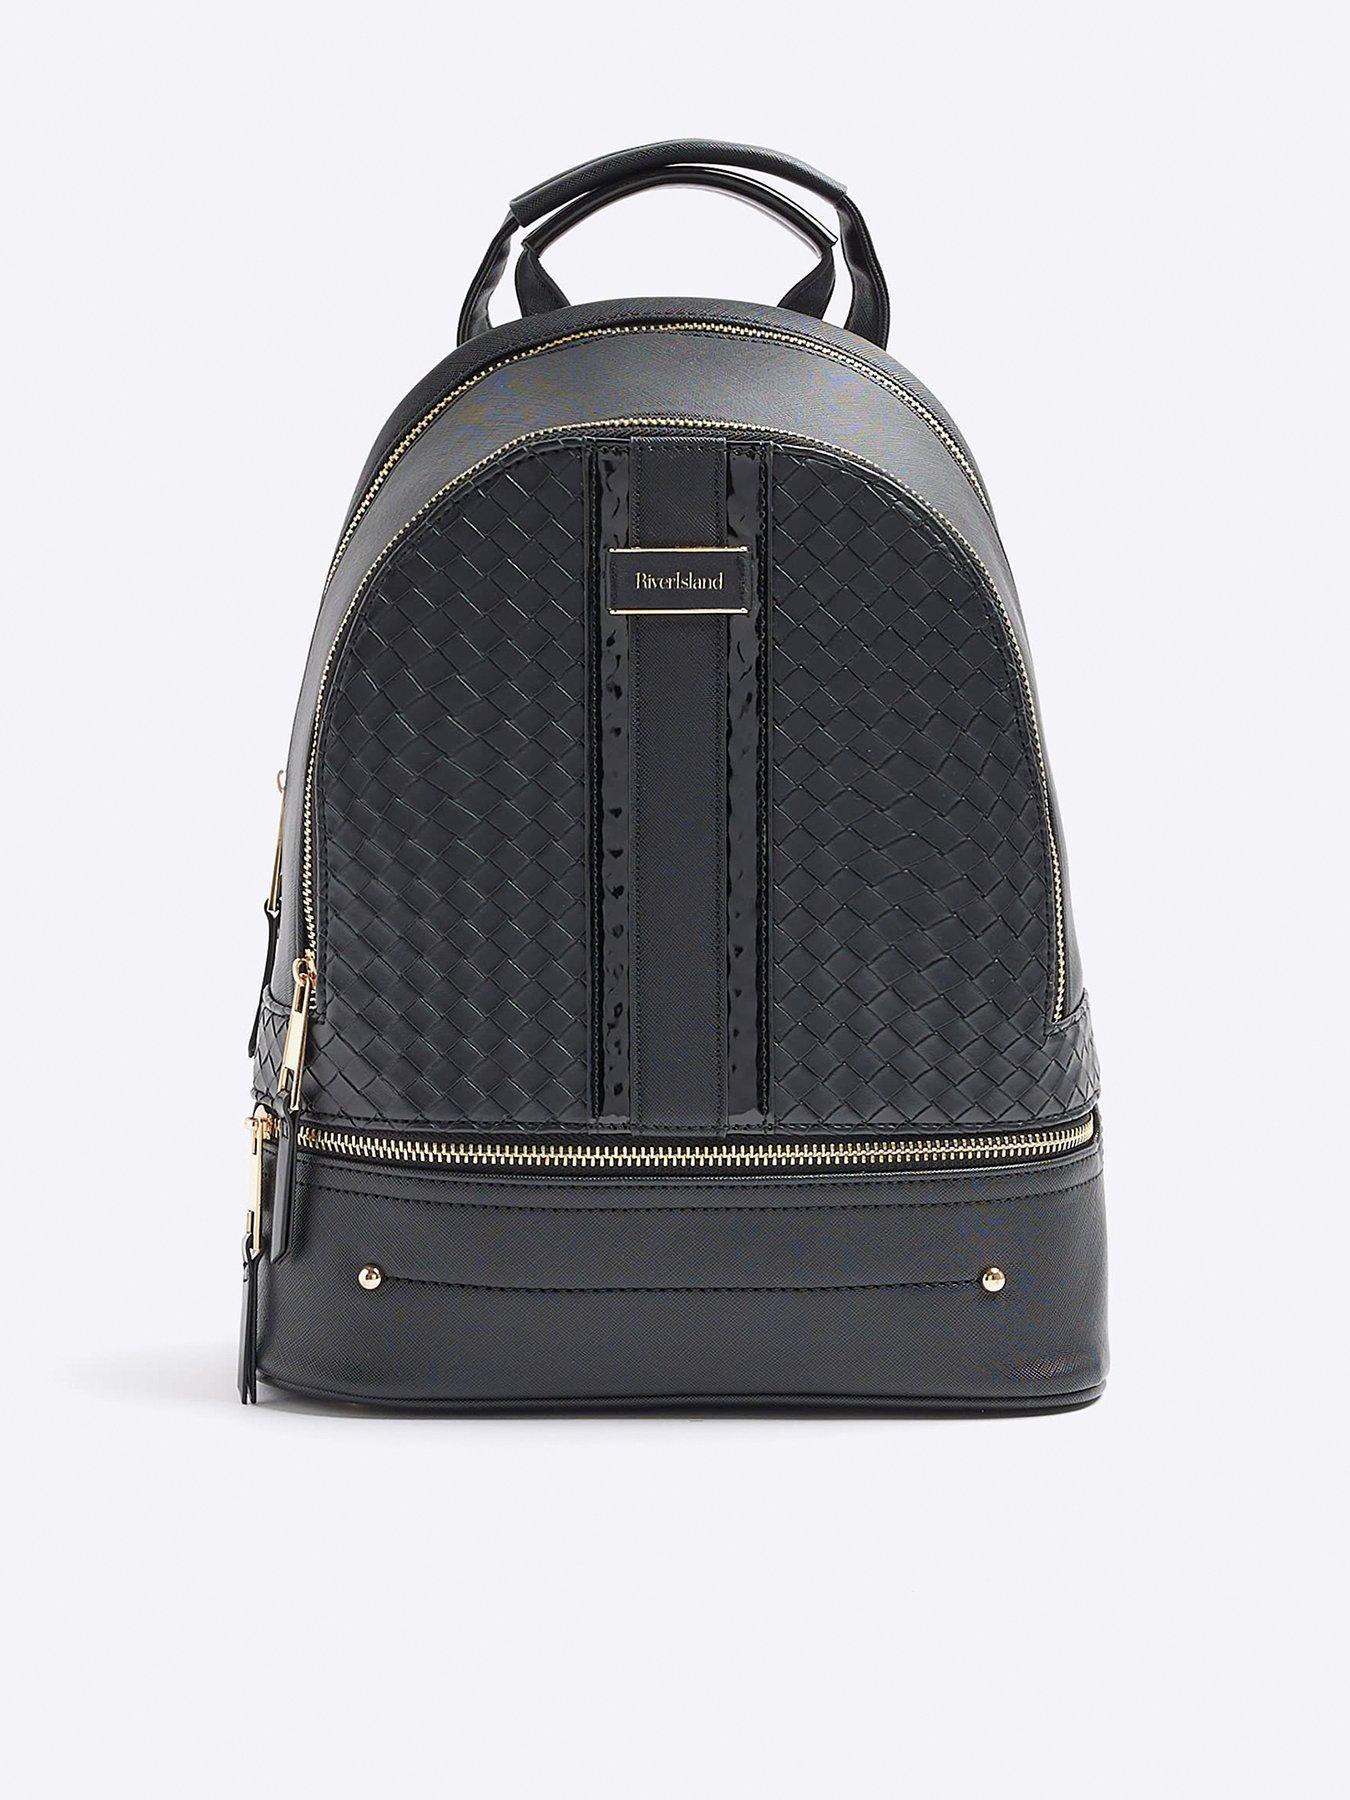 River Island Webbing Front Slouch Bag | very.co.uk